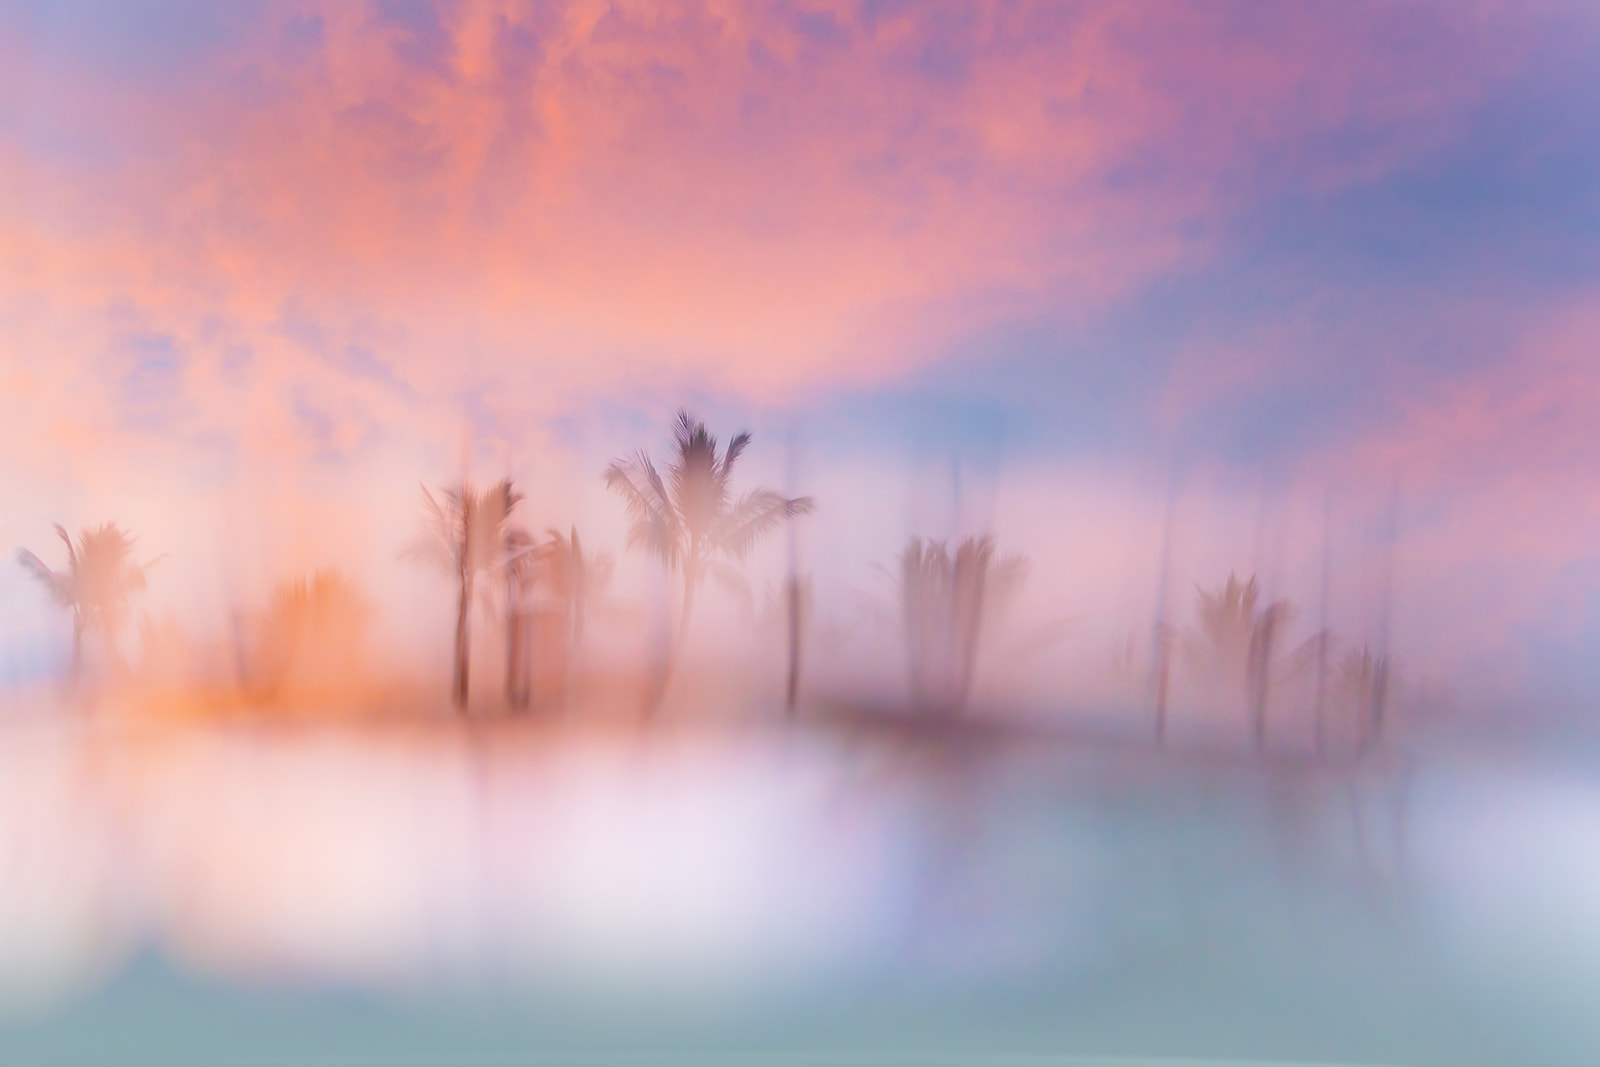 Artistically blurred palm trees along the beach at sunset on Maui.